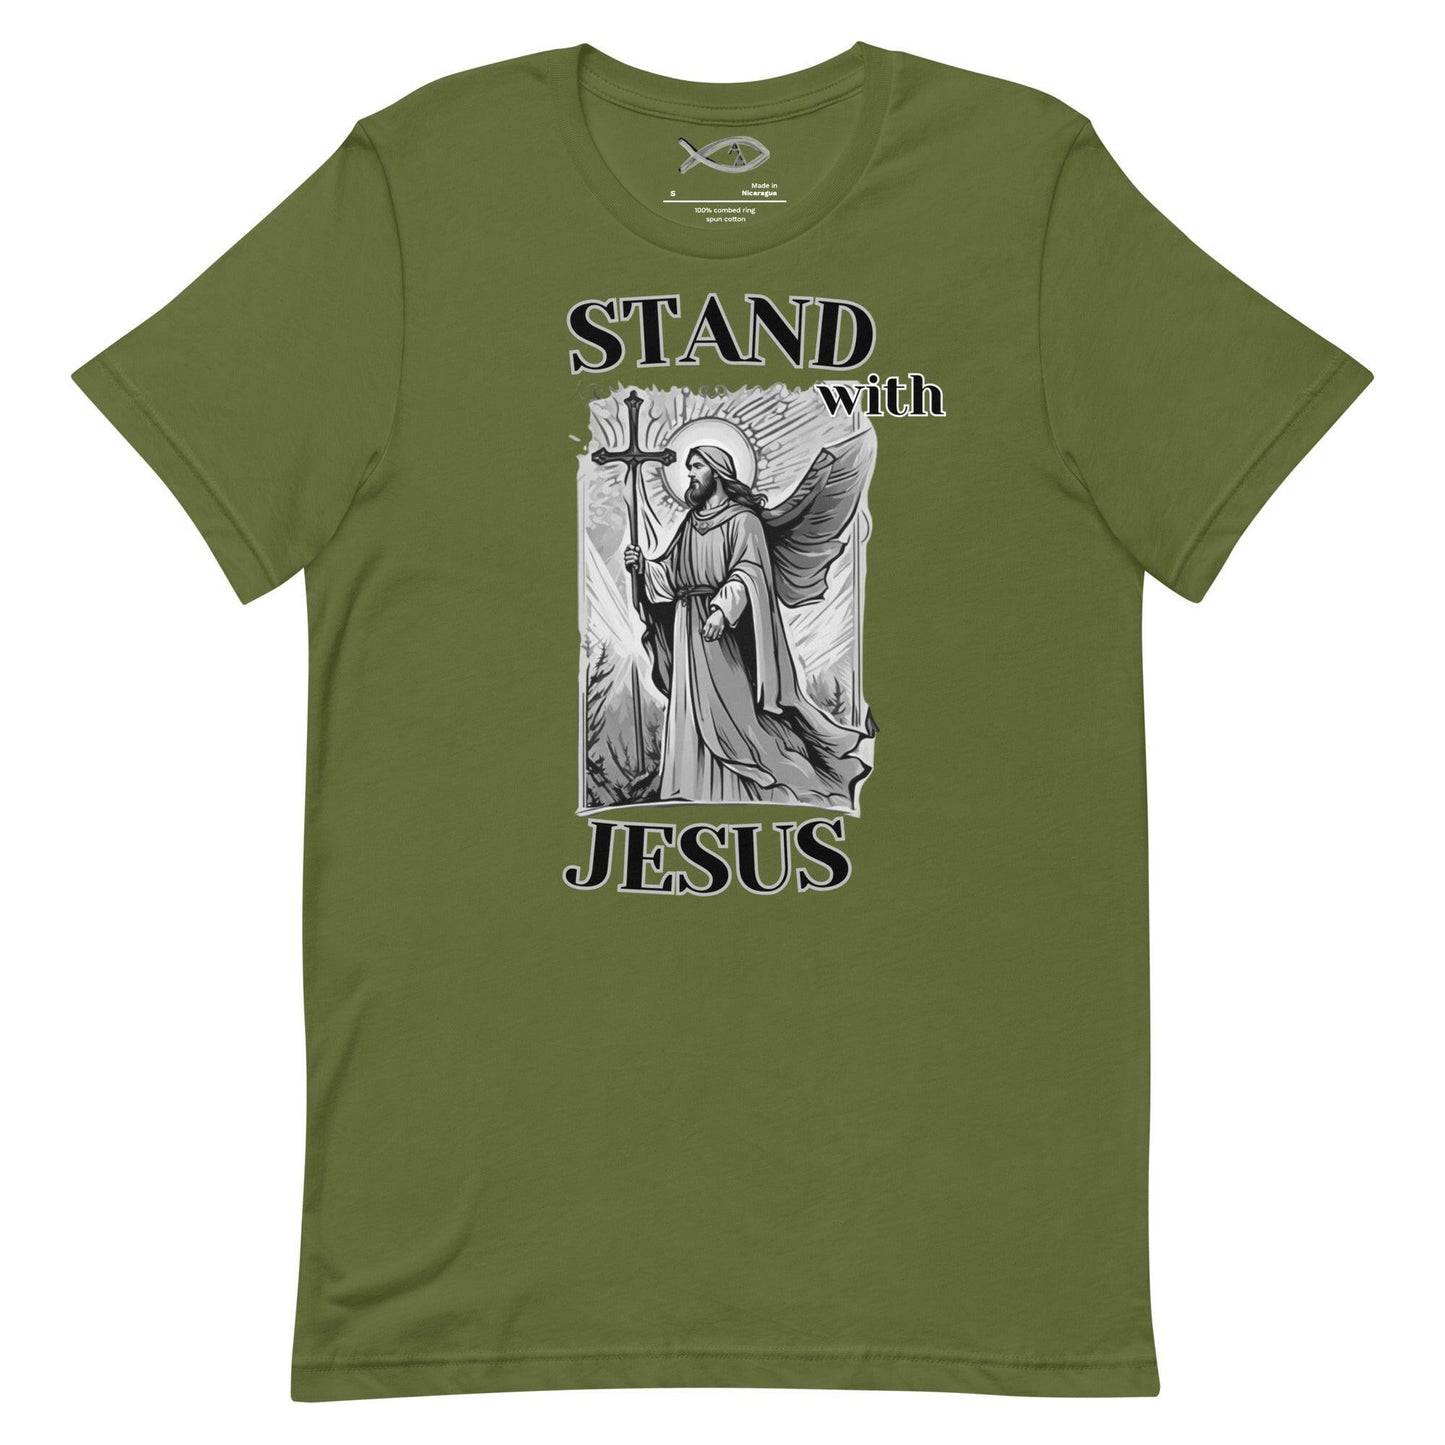 Stand with Jesus - Unisex T-shirt